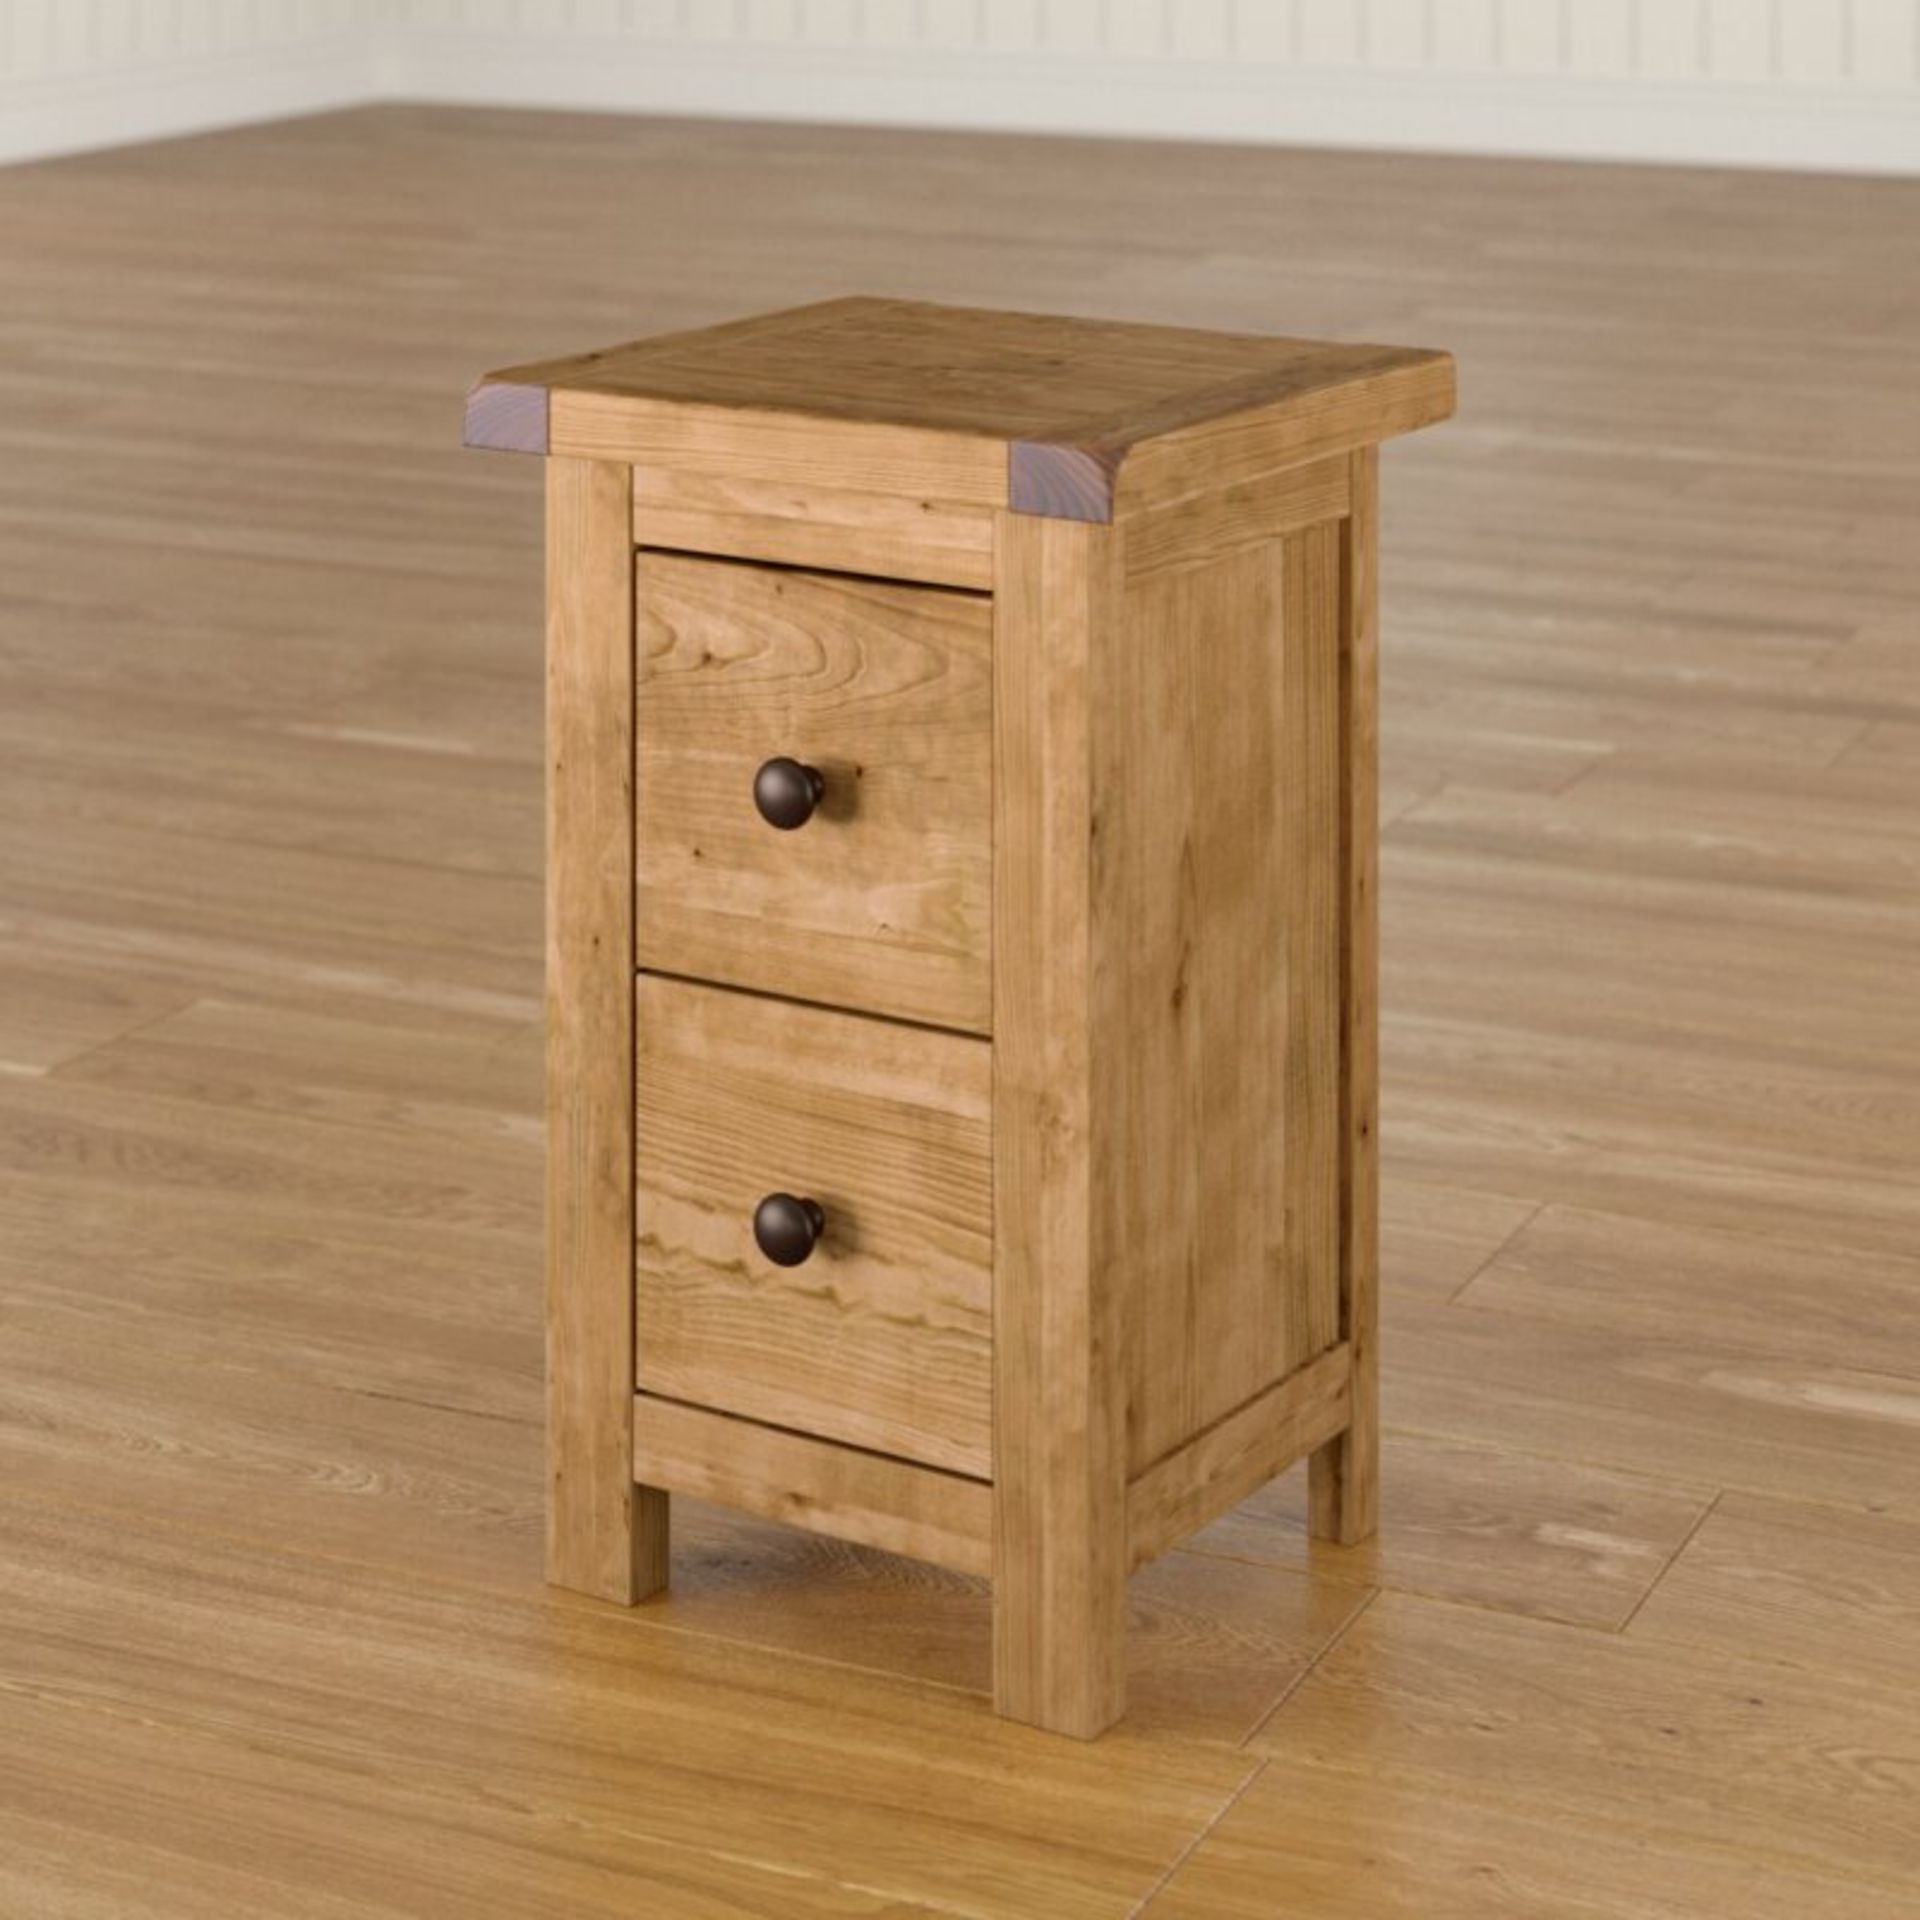 Aubusson 2 Drawer Bedside Table - RRP £67.99. - Image 4 of 4